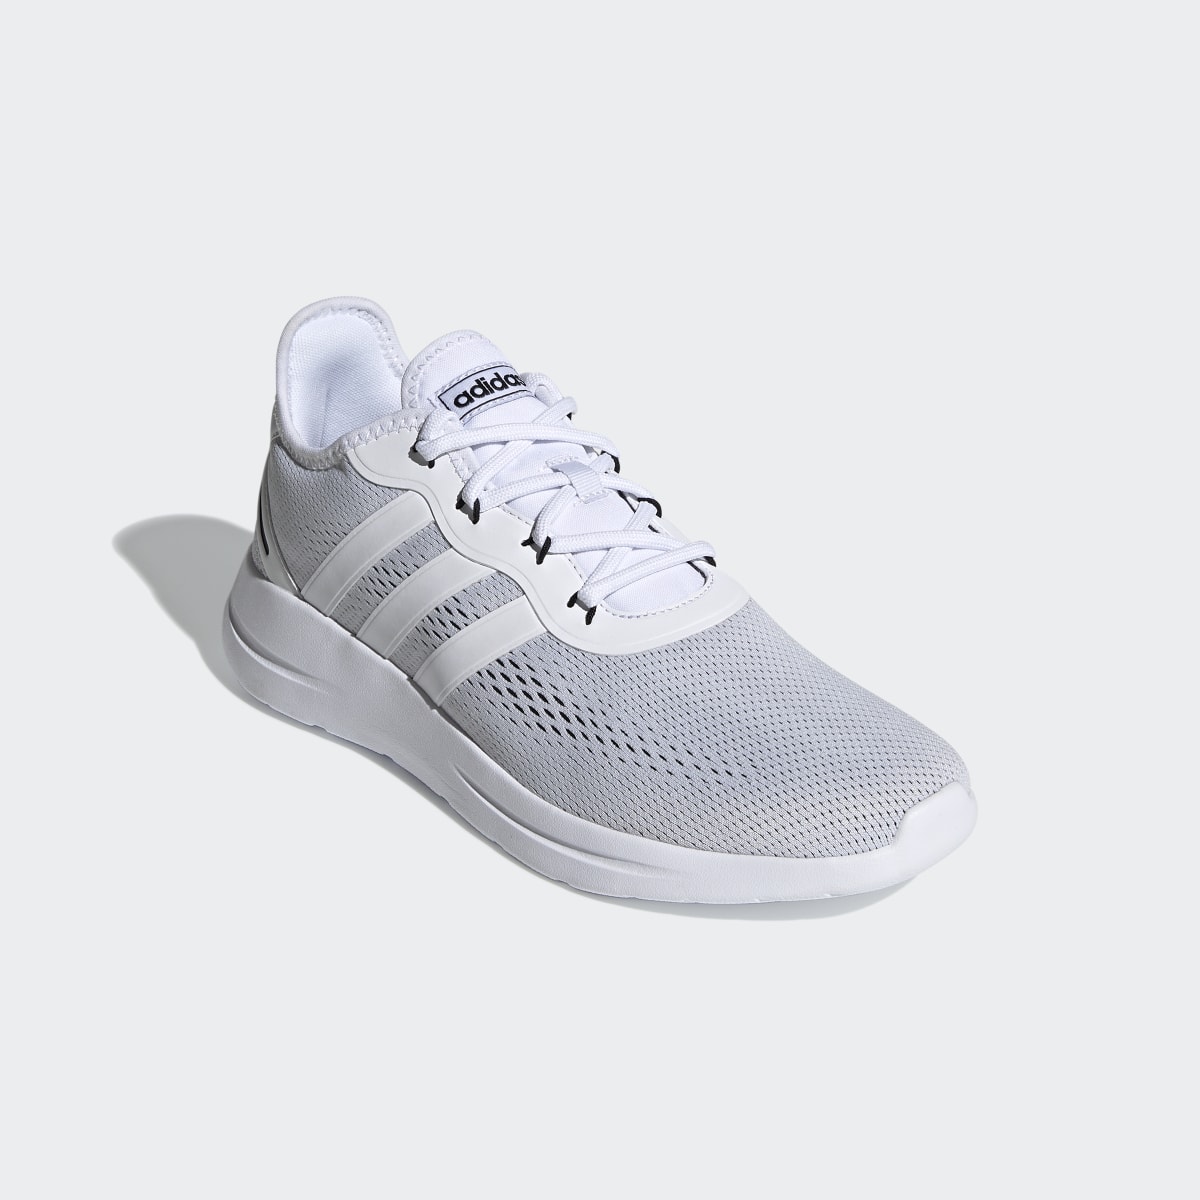 Adidas Lite Racer RBN 2.0 Shoes. 5